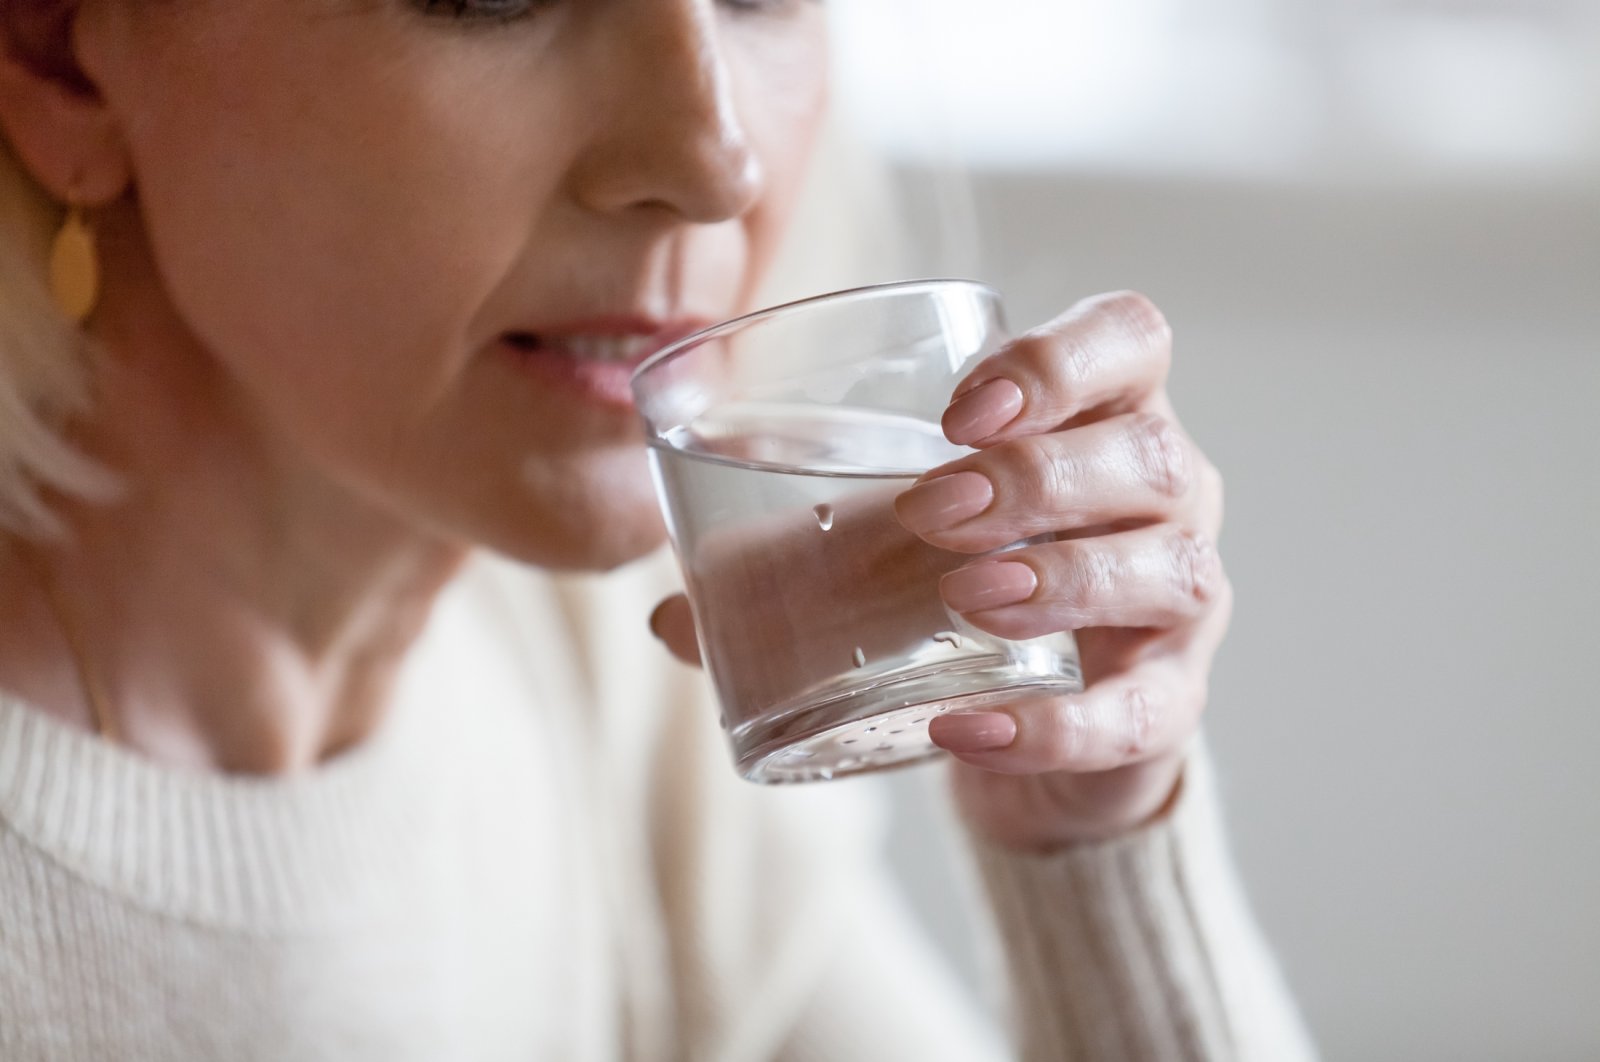 A woman drinks a glass of water. (Shutterstock Photo)